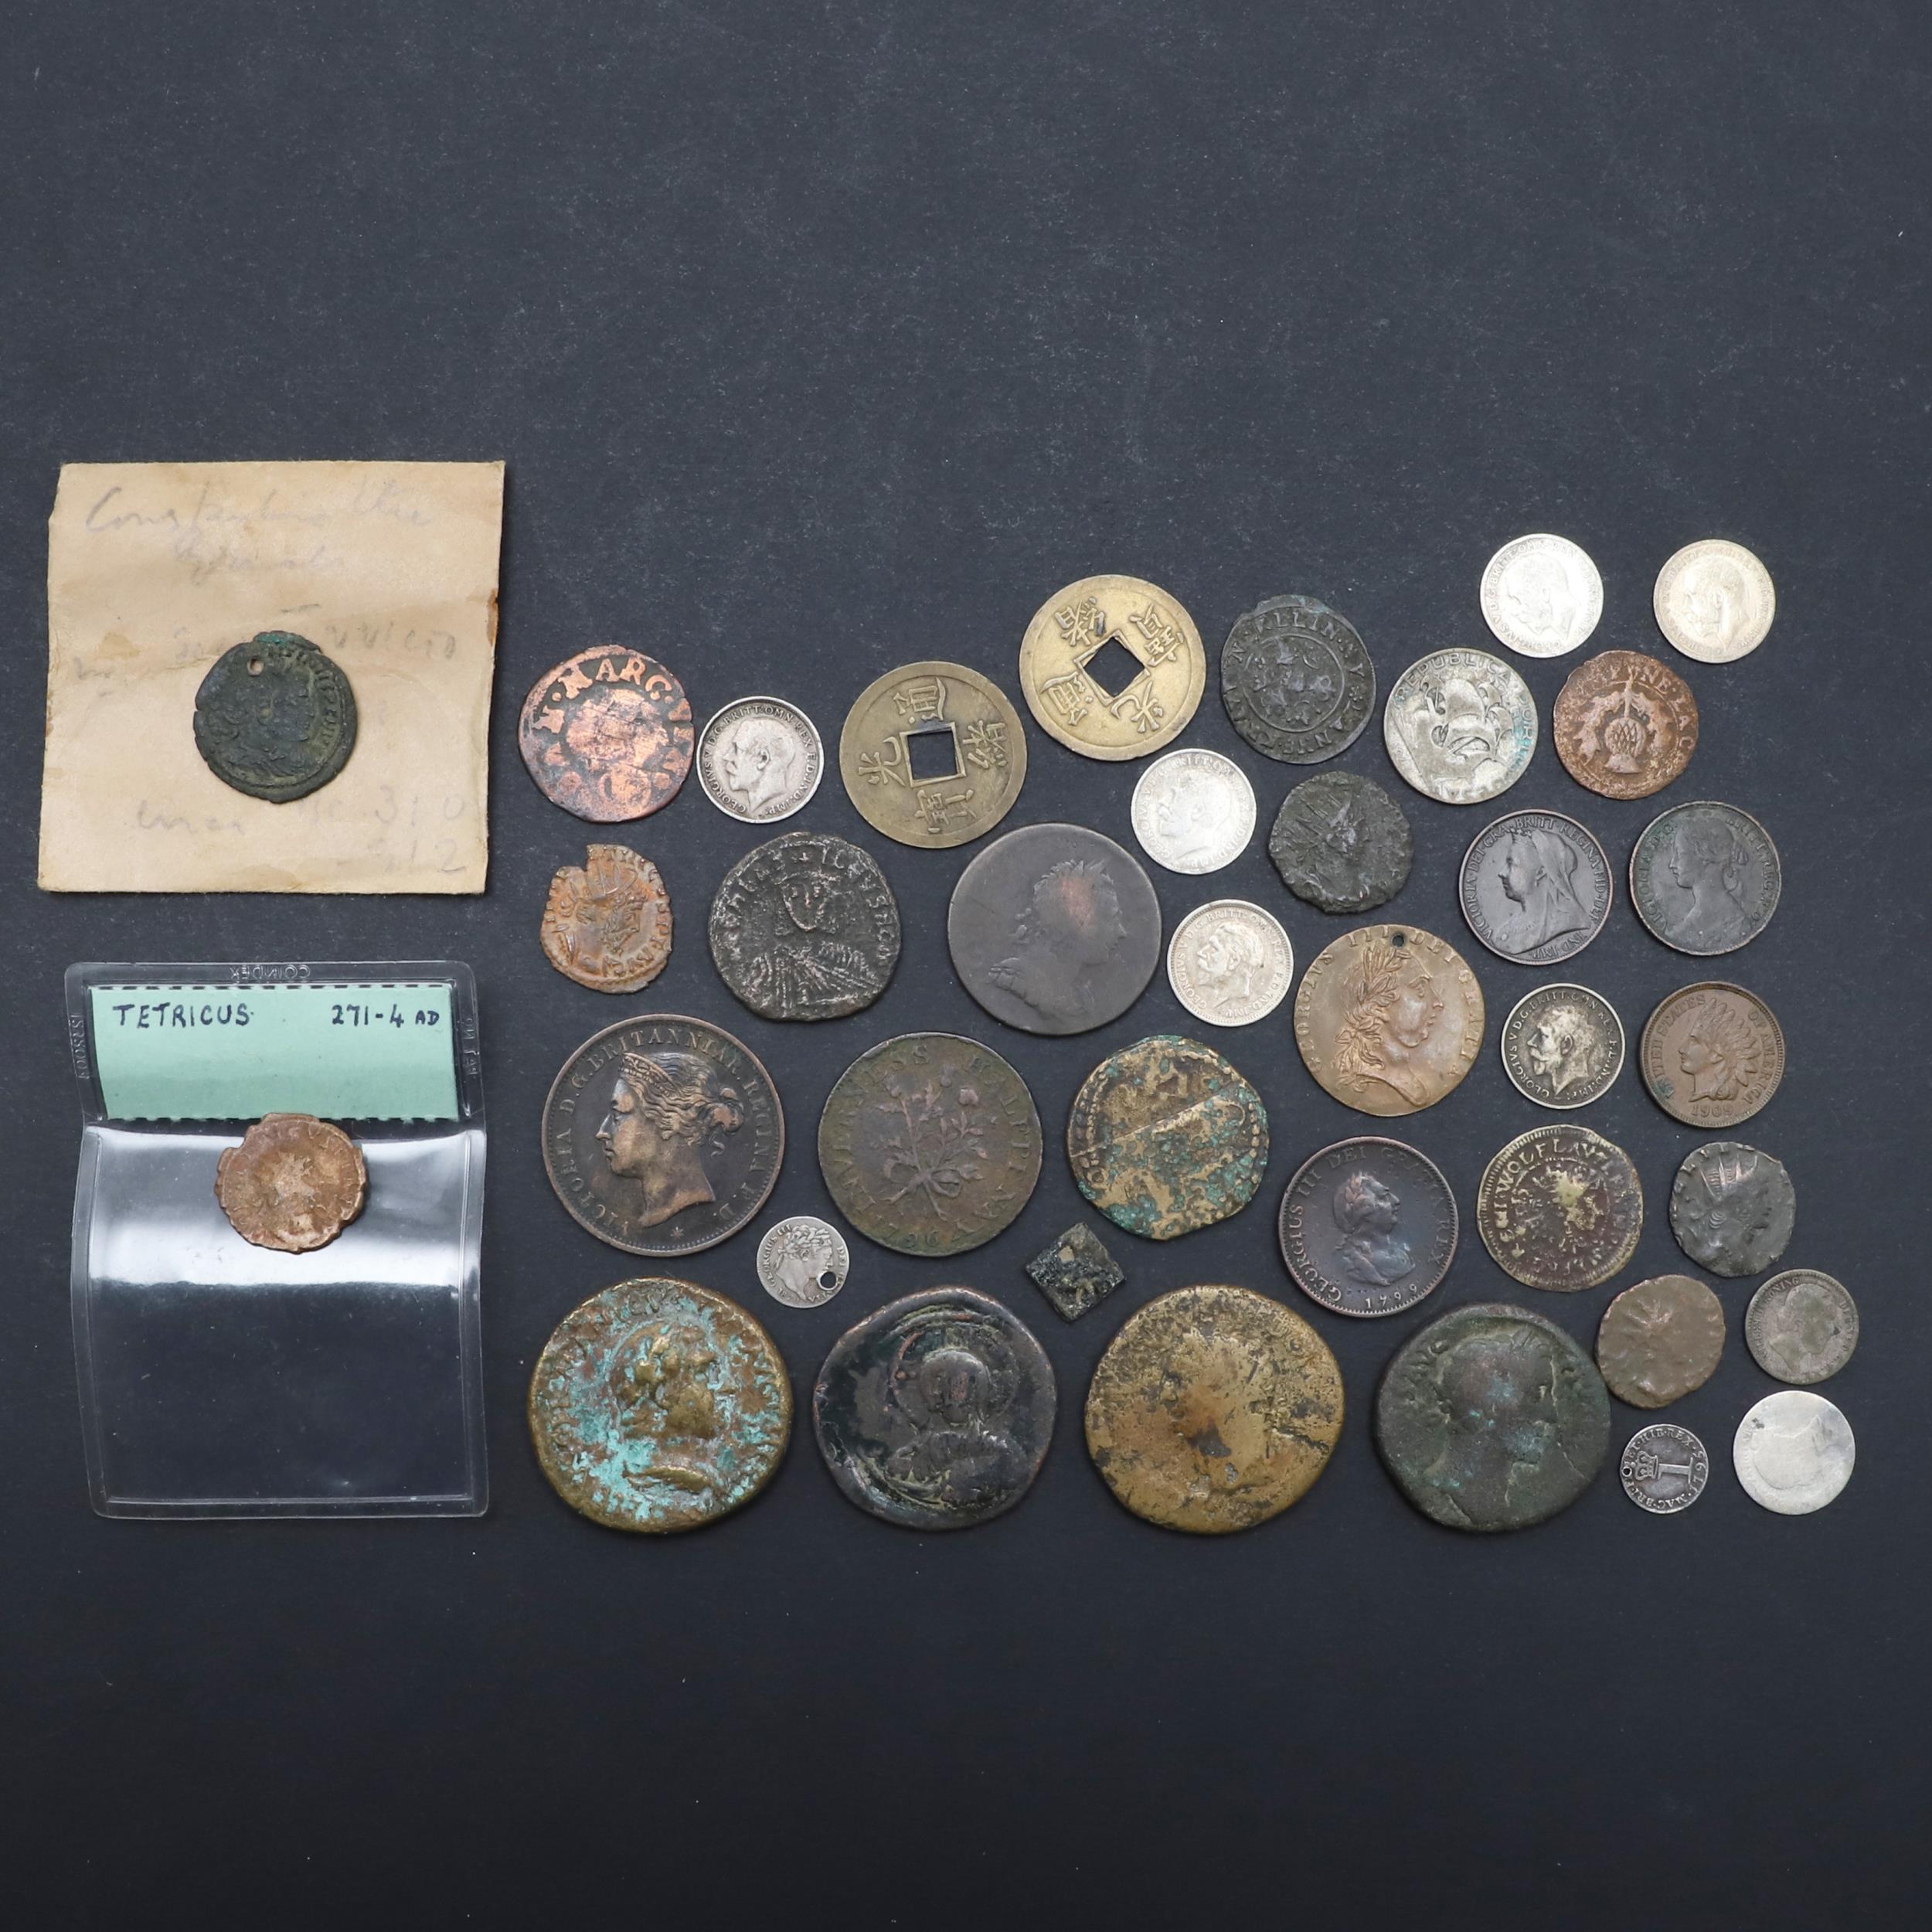 A SMALL COLLECTION OF COINS INCLUDING ROMAN, JETONS AND OTHERS.